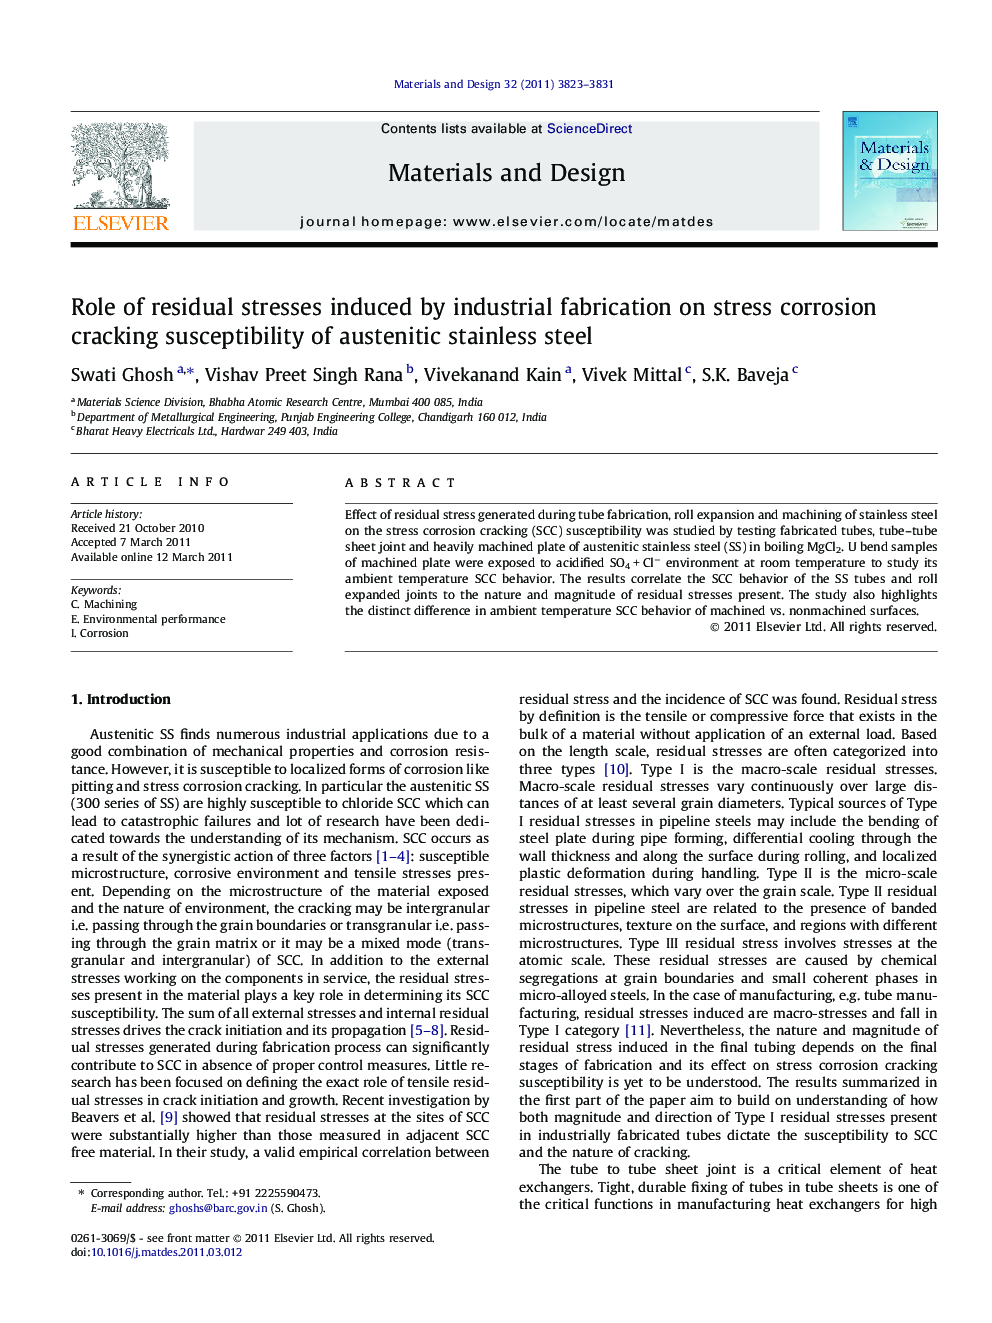 Role of residual stresses induced by industrial fabrication on stress corrosion cracking susceptibility of austenitic stainless steel